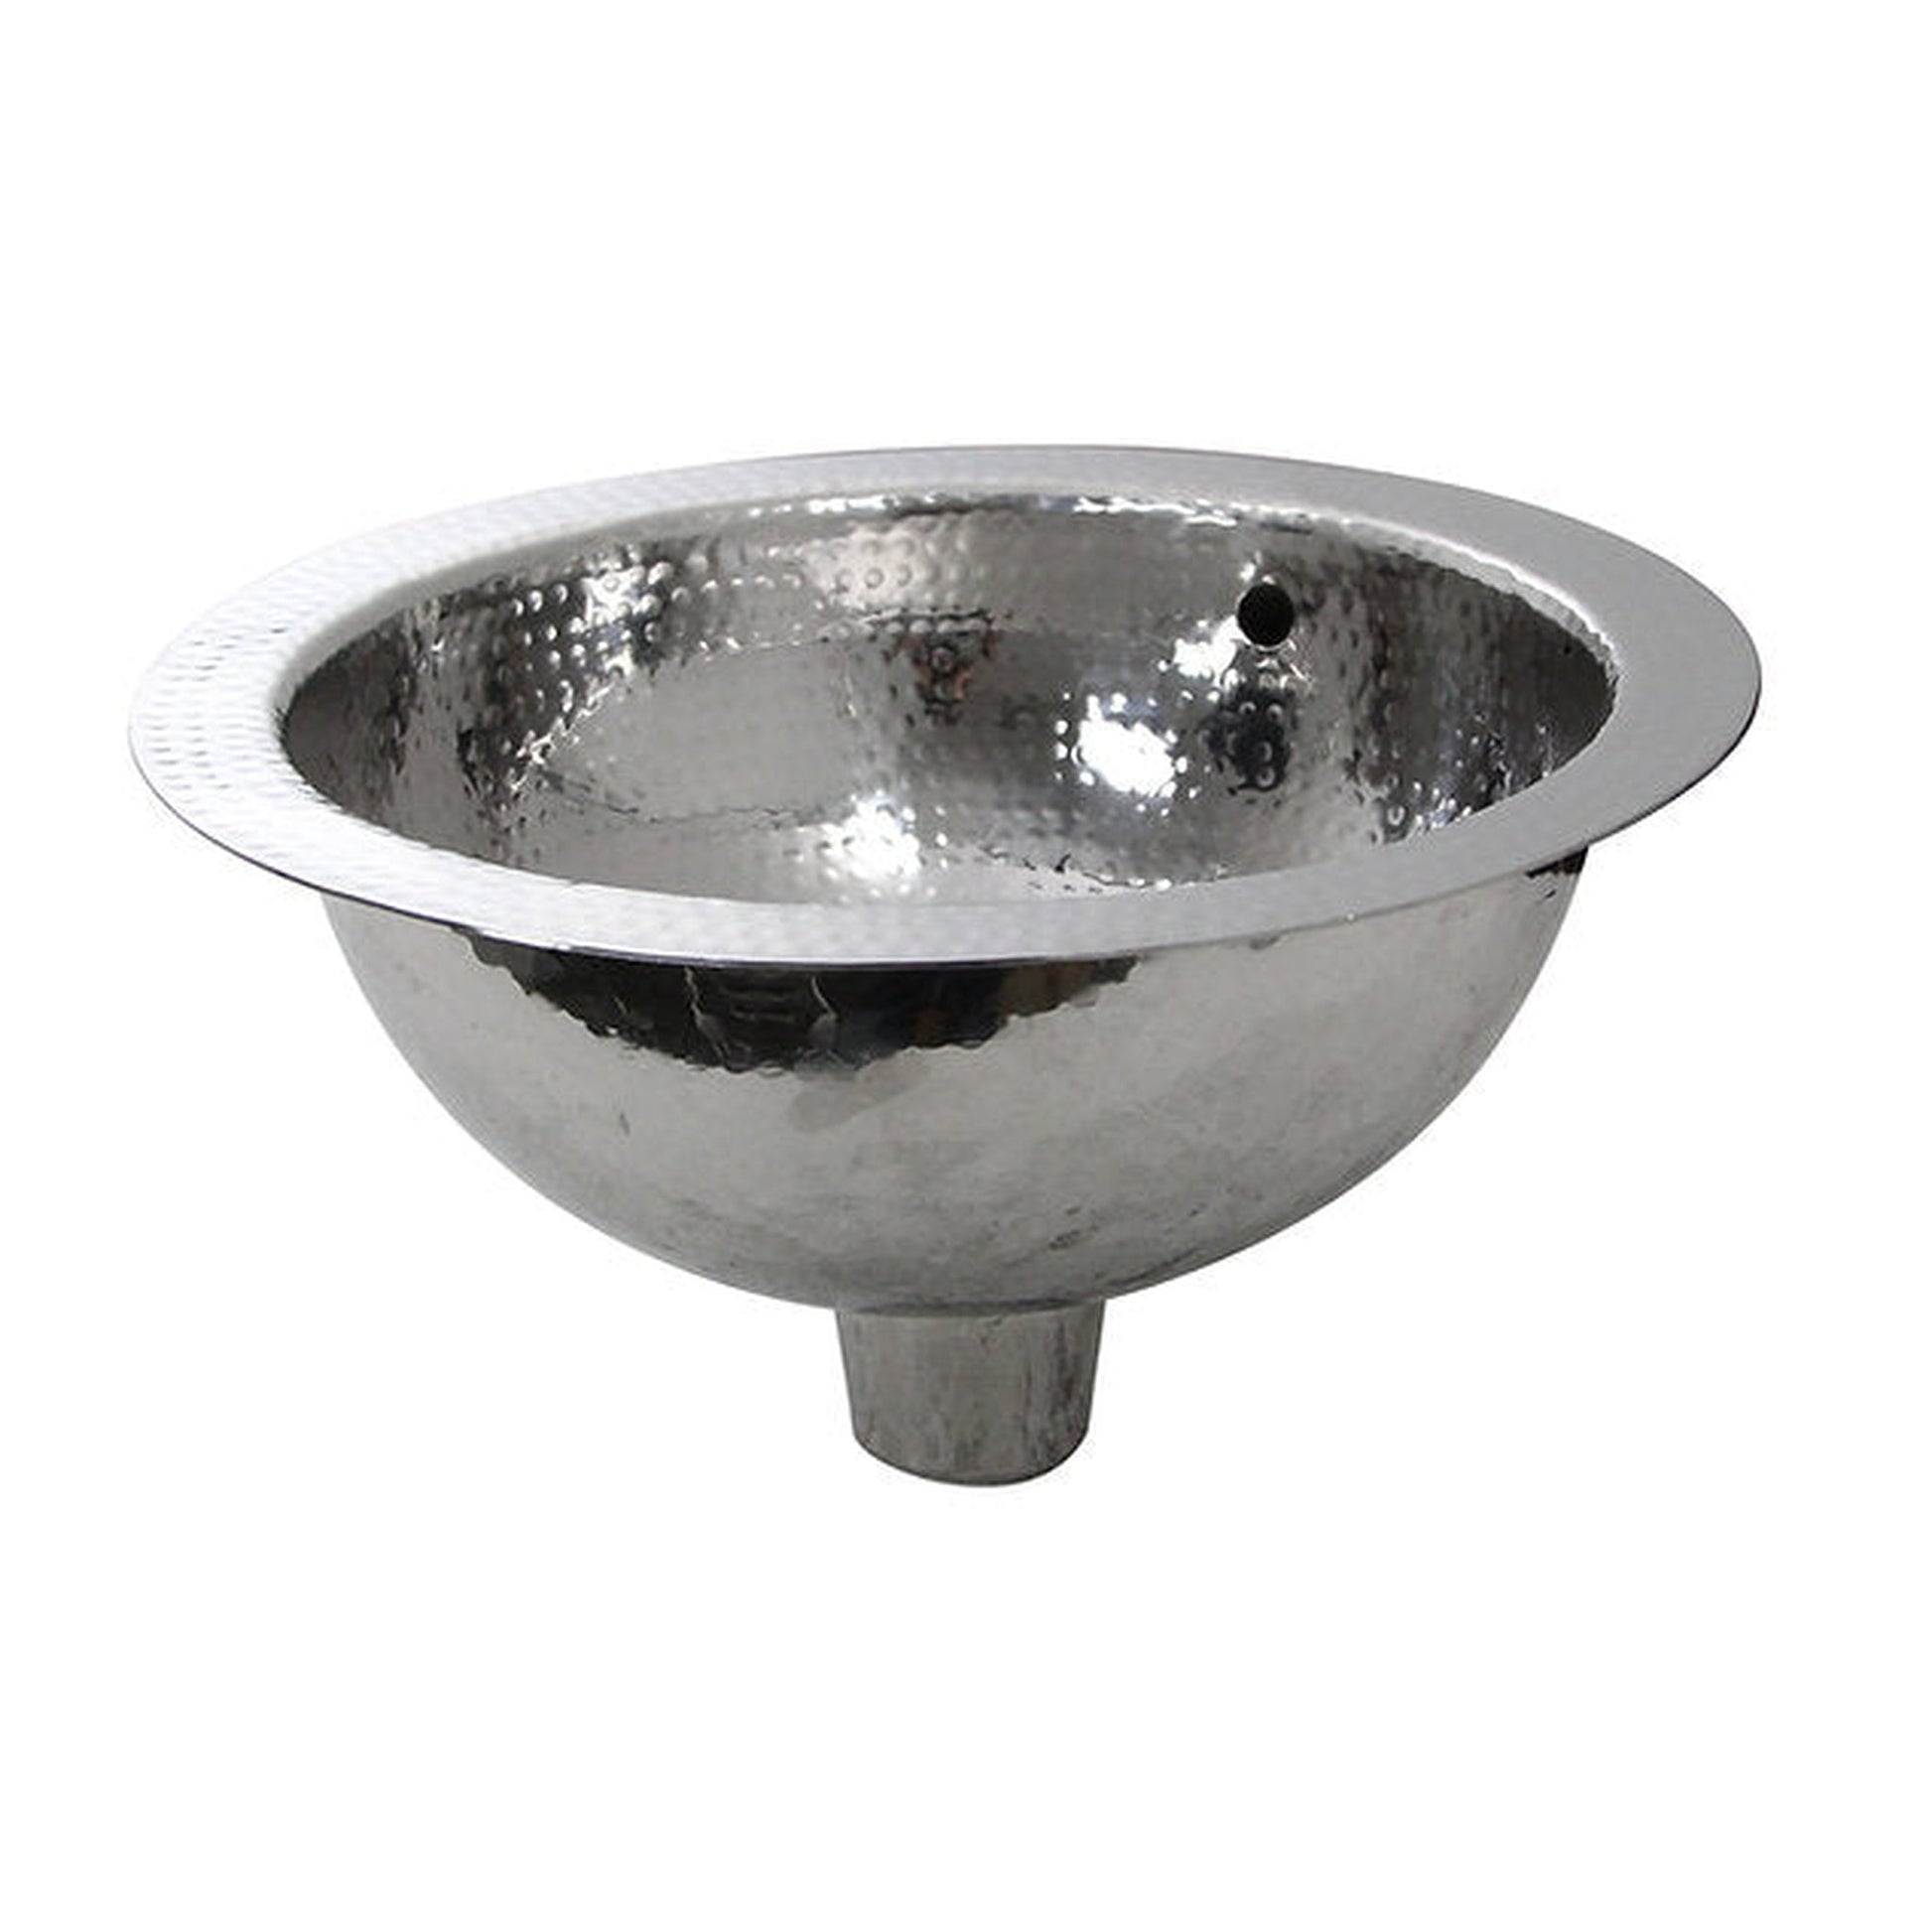 Nantucket Sinks Brightwork Home 13" Round Hand Hammered Polished Stainless Steel Undermount Sink With Overflow